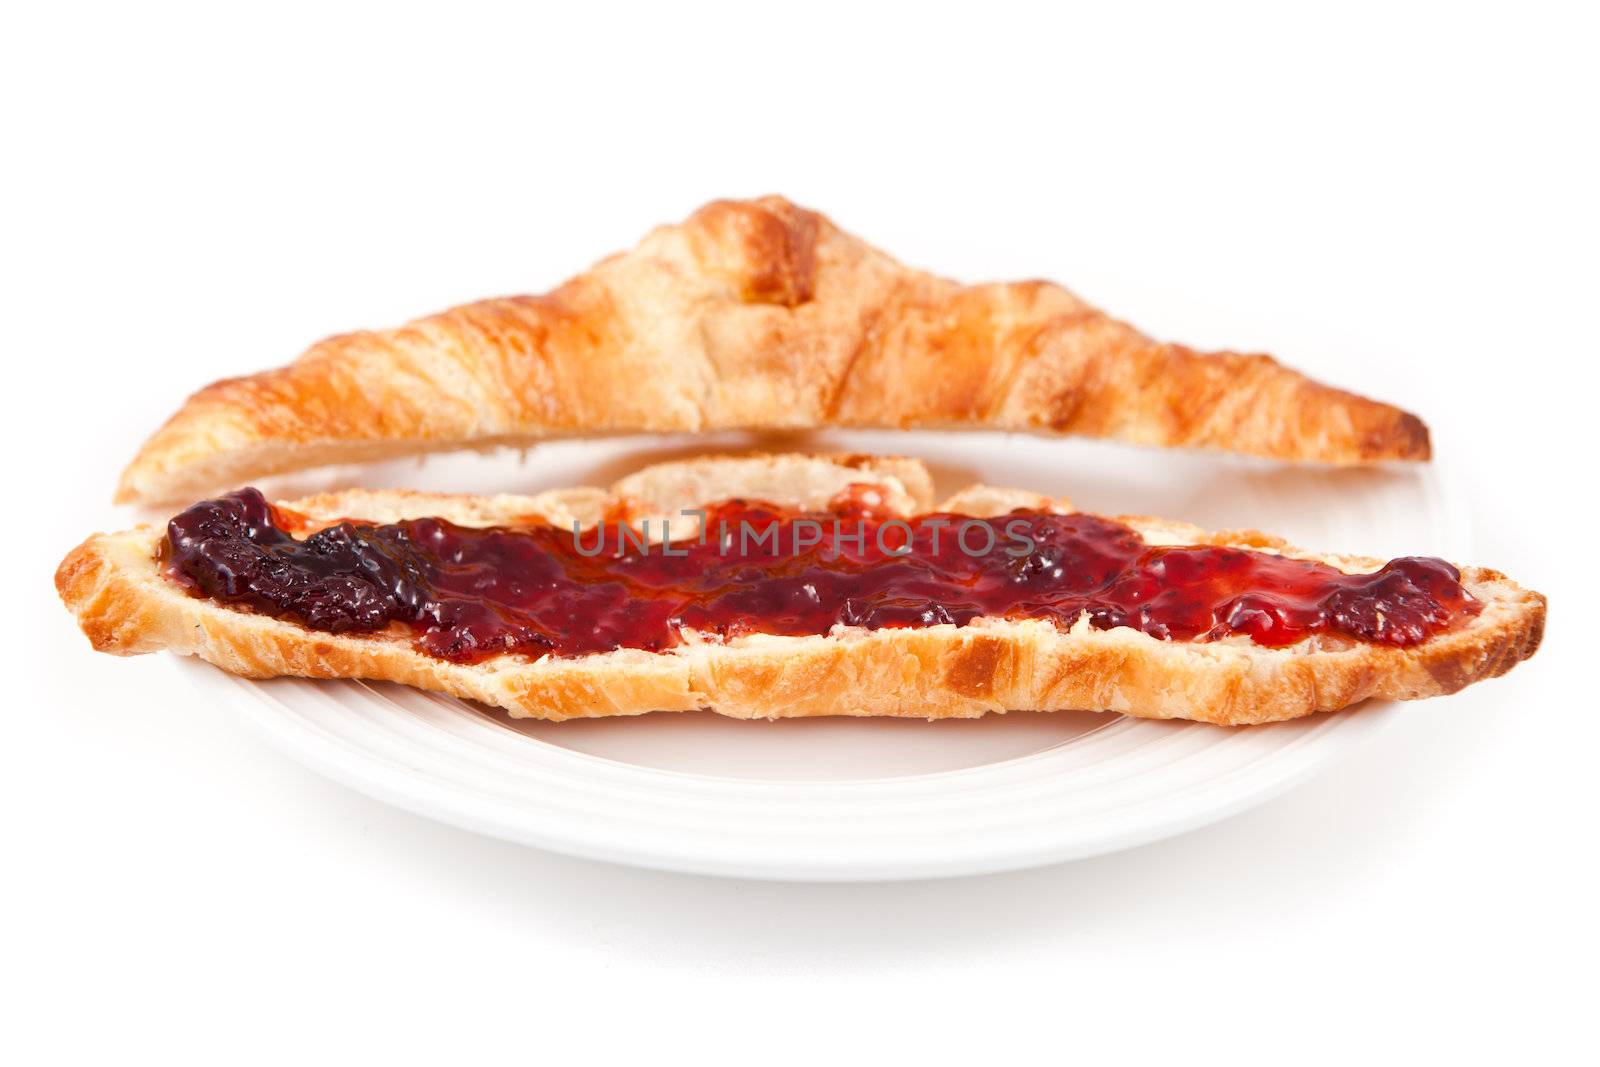 Croissant spread with jam in a plateful against white background